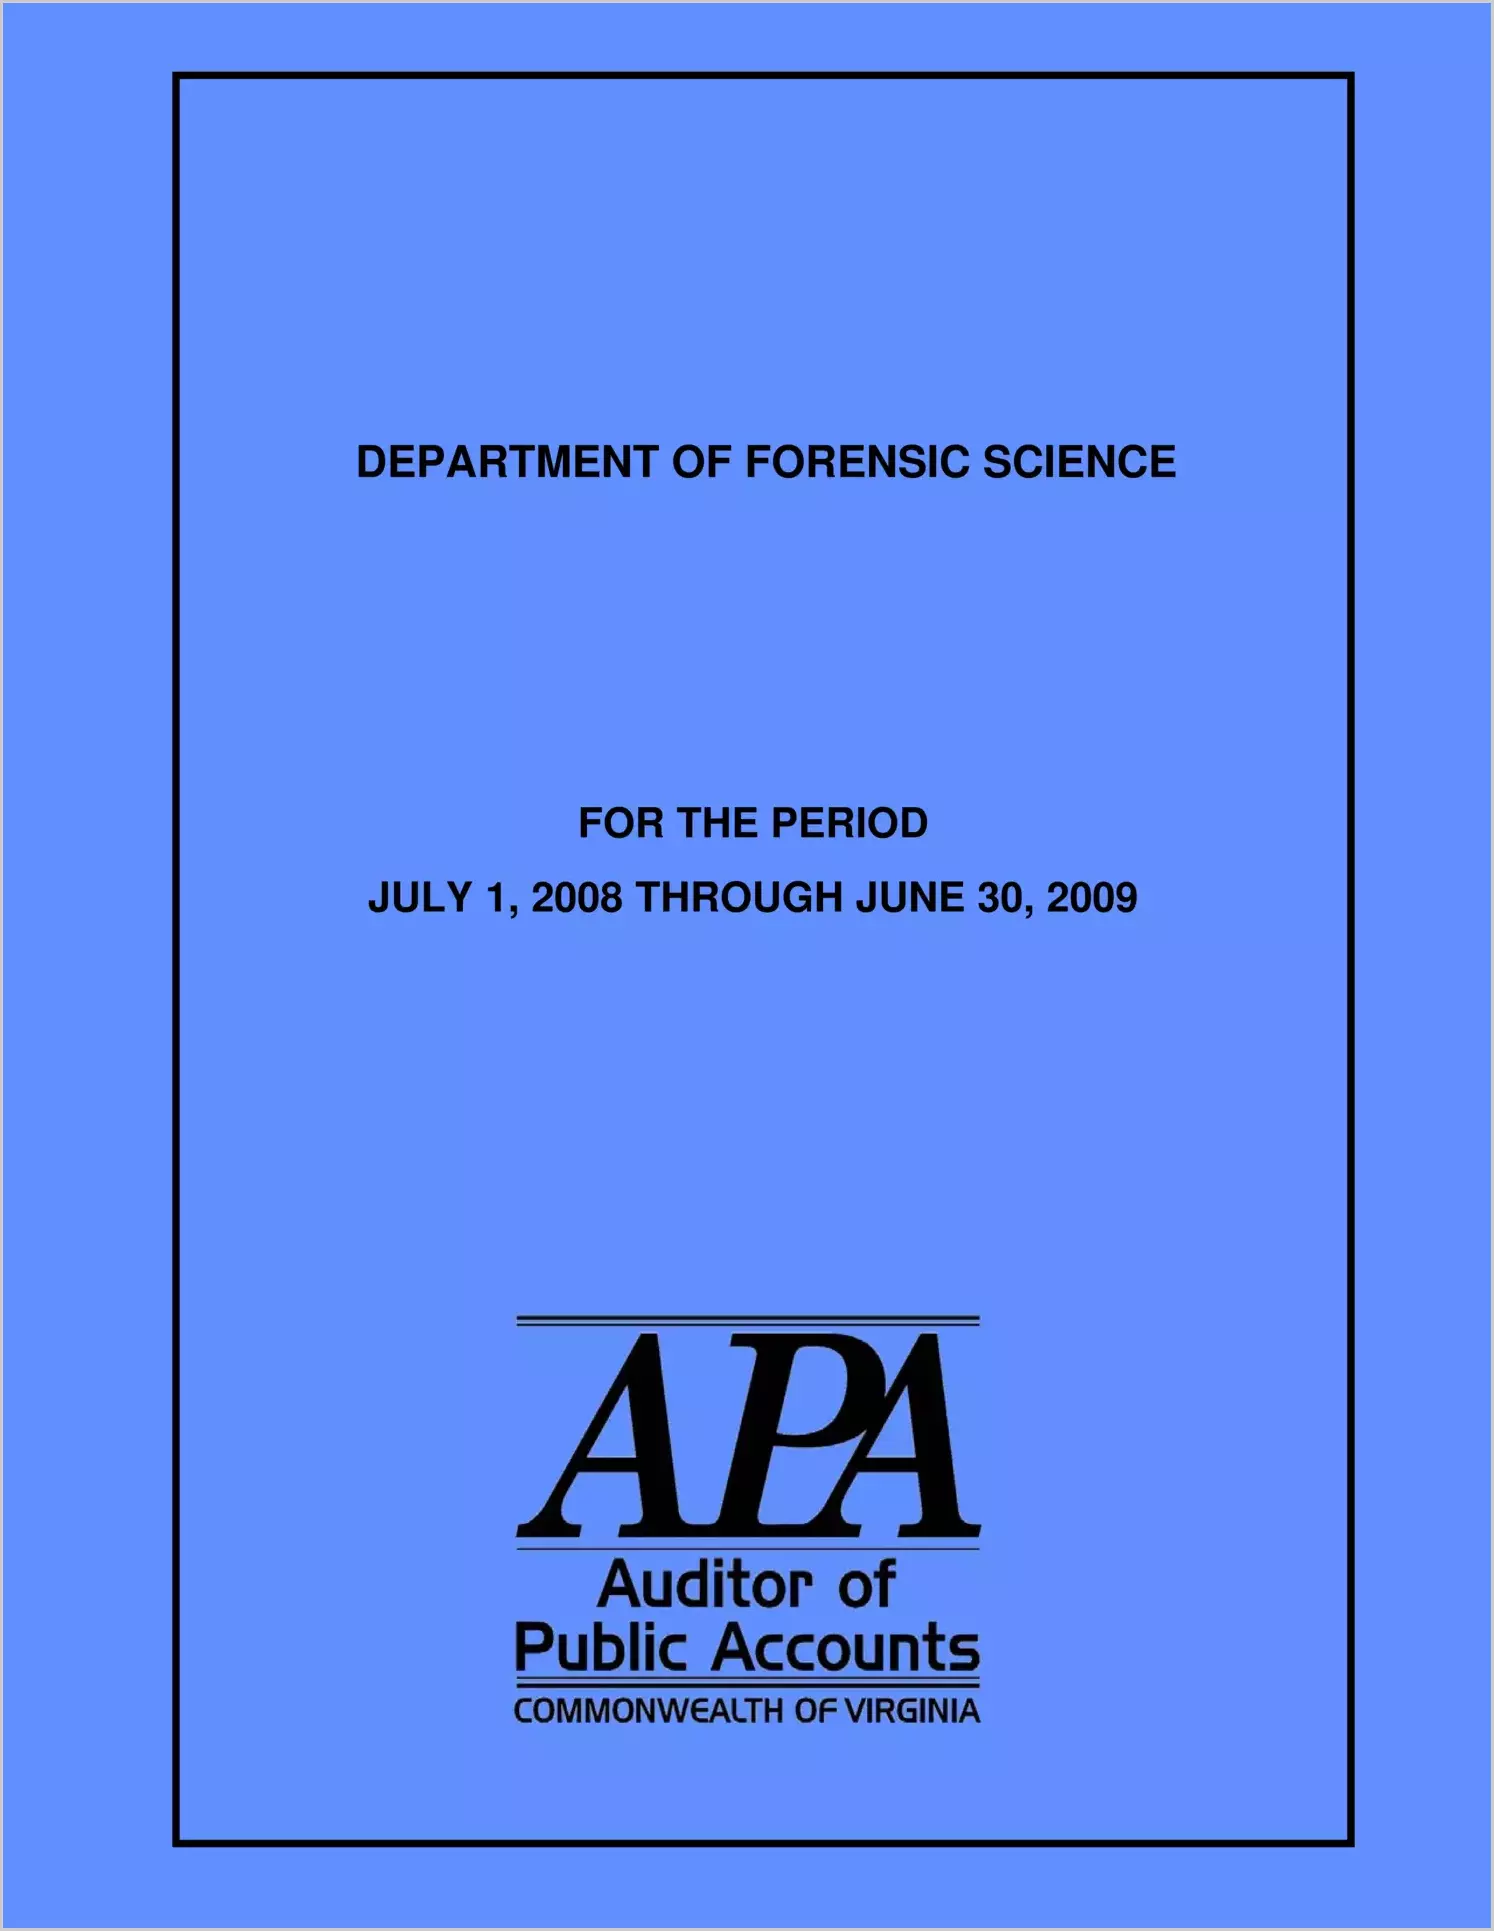 Department of Forensic Science Report on Audit for the Period July 1, 2008 through June 30, 2009